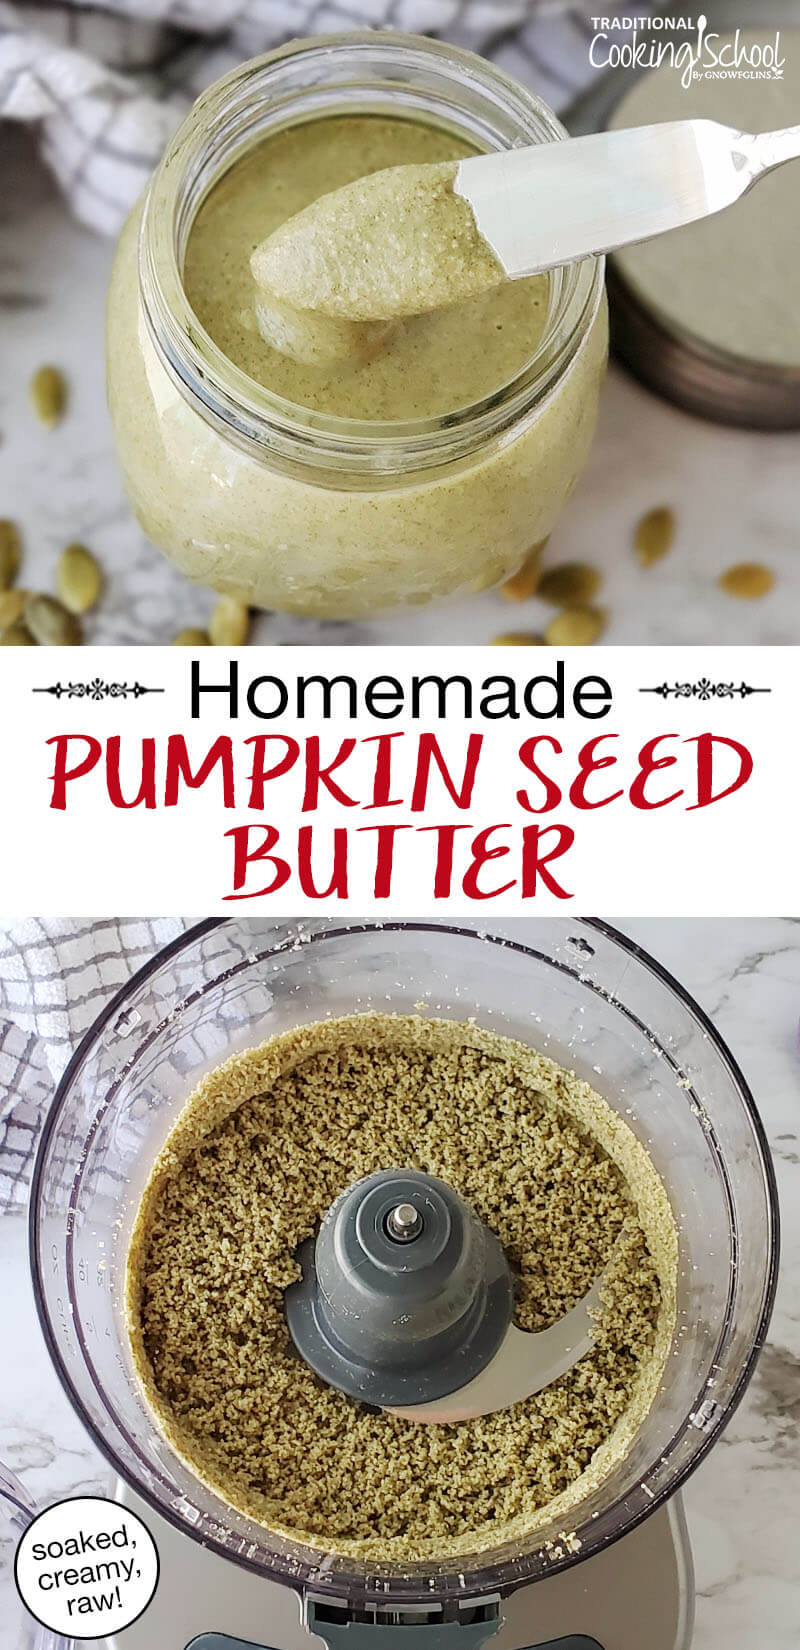 photo collage of making pumpkin seed butter: blending it till smooth in a food processor, and scooping the finished creamy result out of a small glass jar. Text overlay says: "Homemade Pumpkin Seed Butter (soaked, creamy, raw!)"